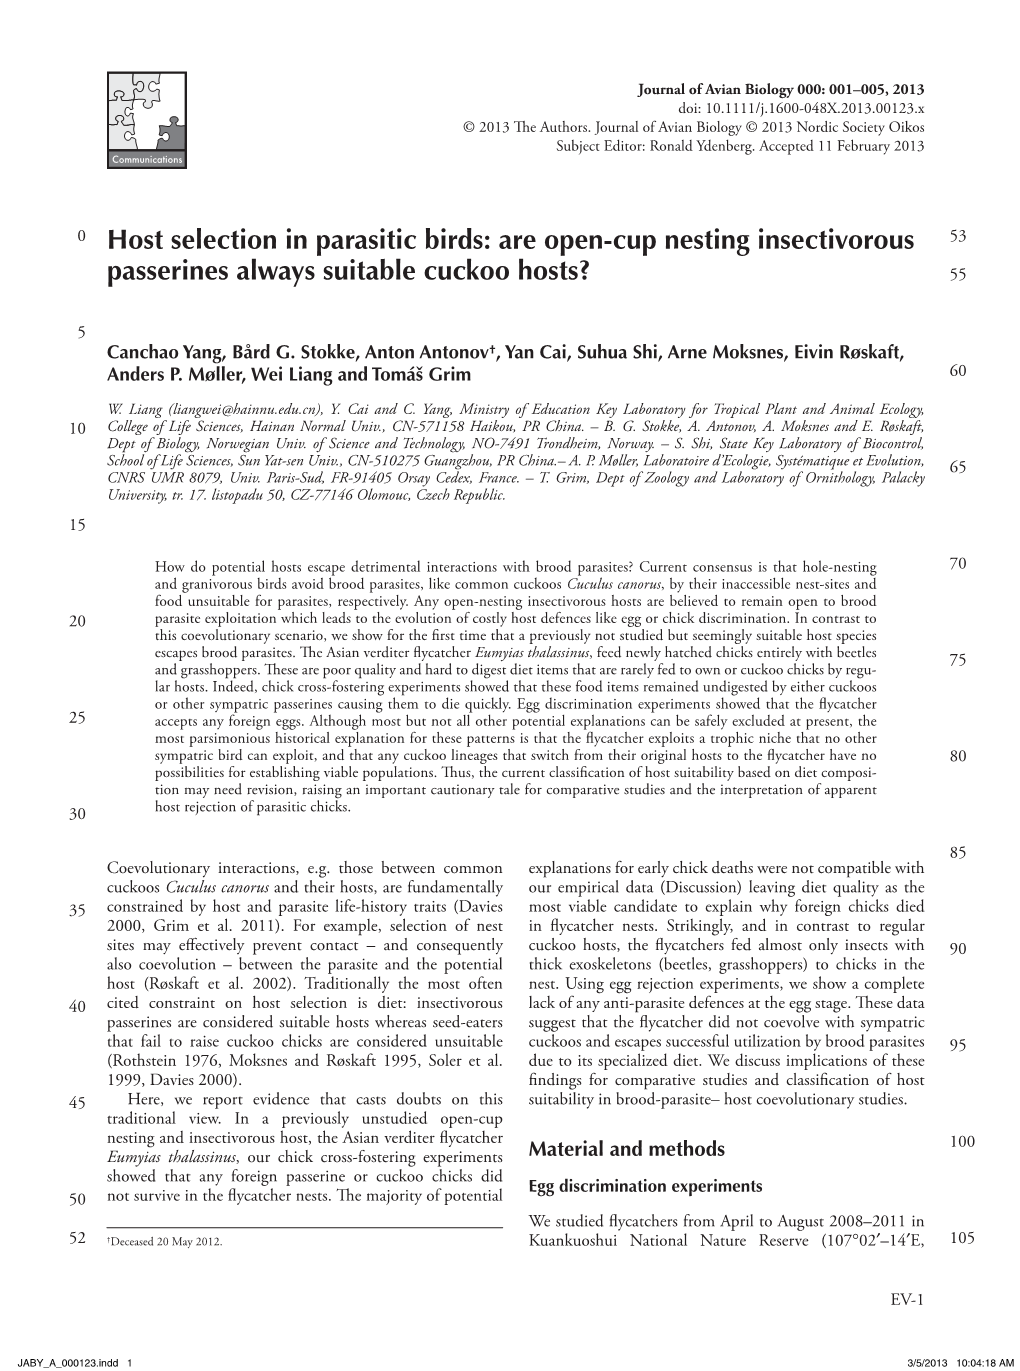 Host Selection in Parasitic Birds: Are Open-Cup Nesting Insectivorous 53 Passerines Always Suitable Cuckoo Hosts? 55